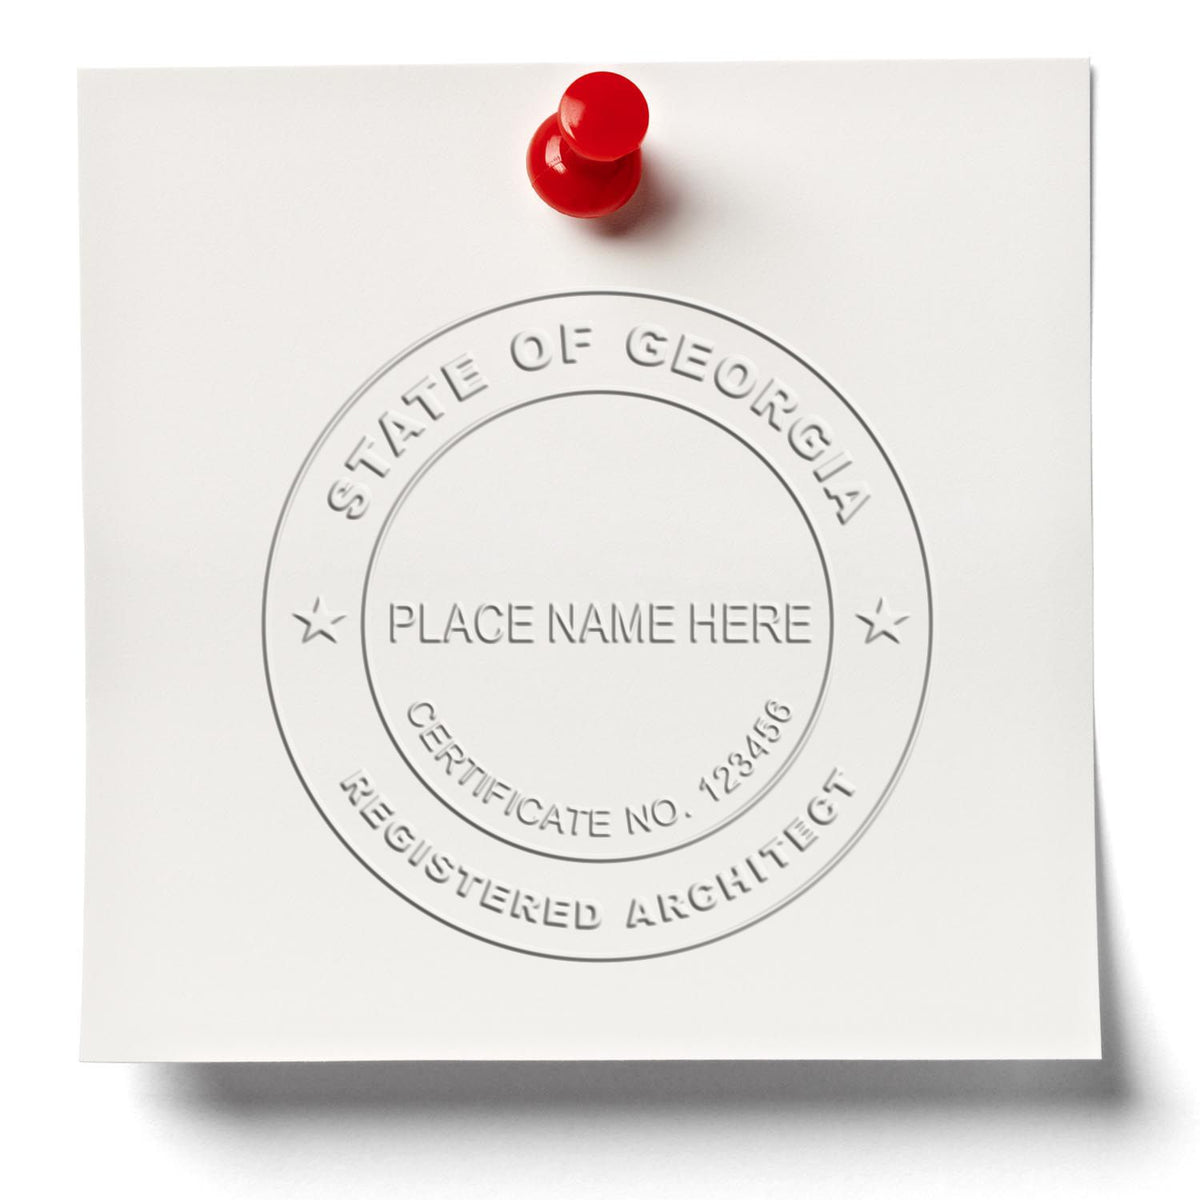 This paper is stamped with a sample imprint of the Extended Long Reach Georgia Architect Seal Embosser, signifying its quality and reliability.